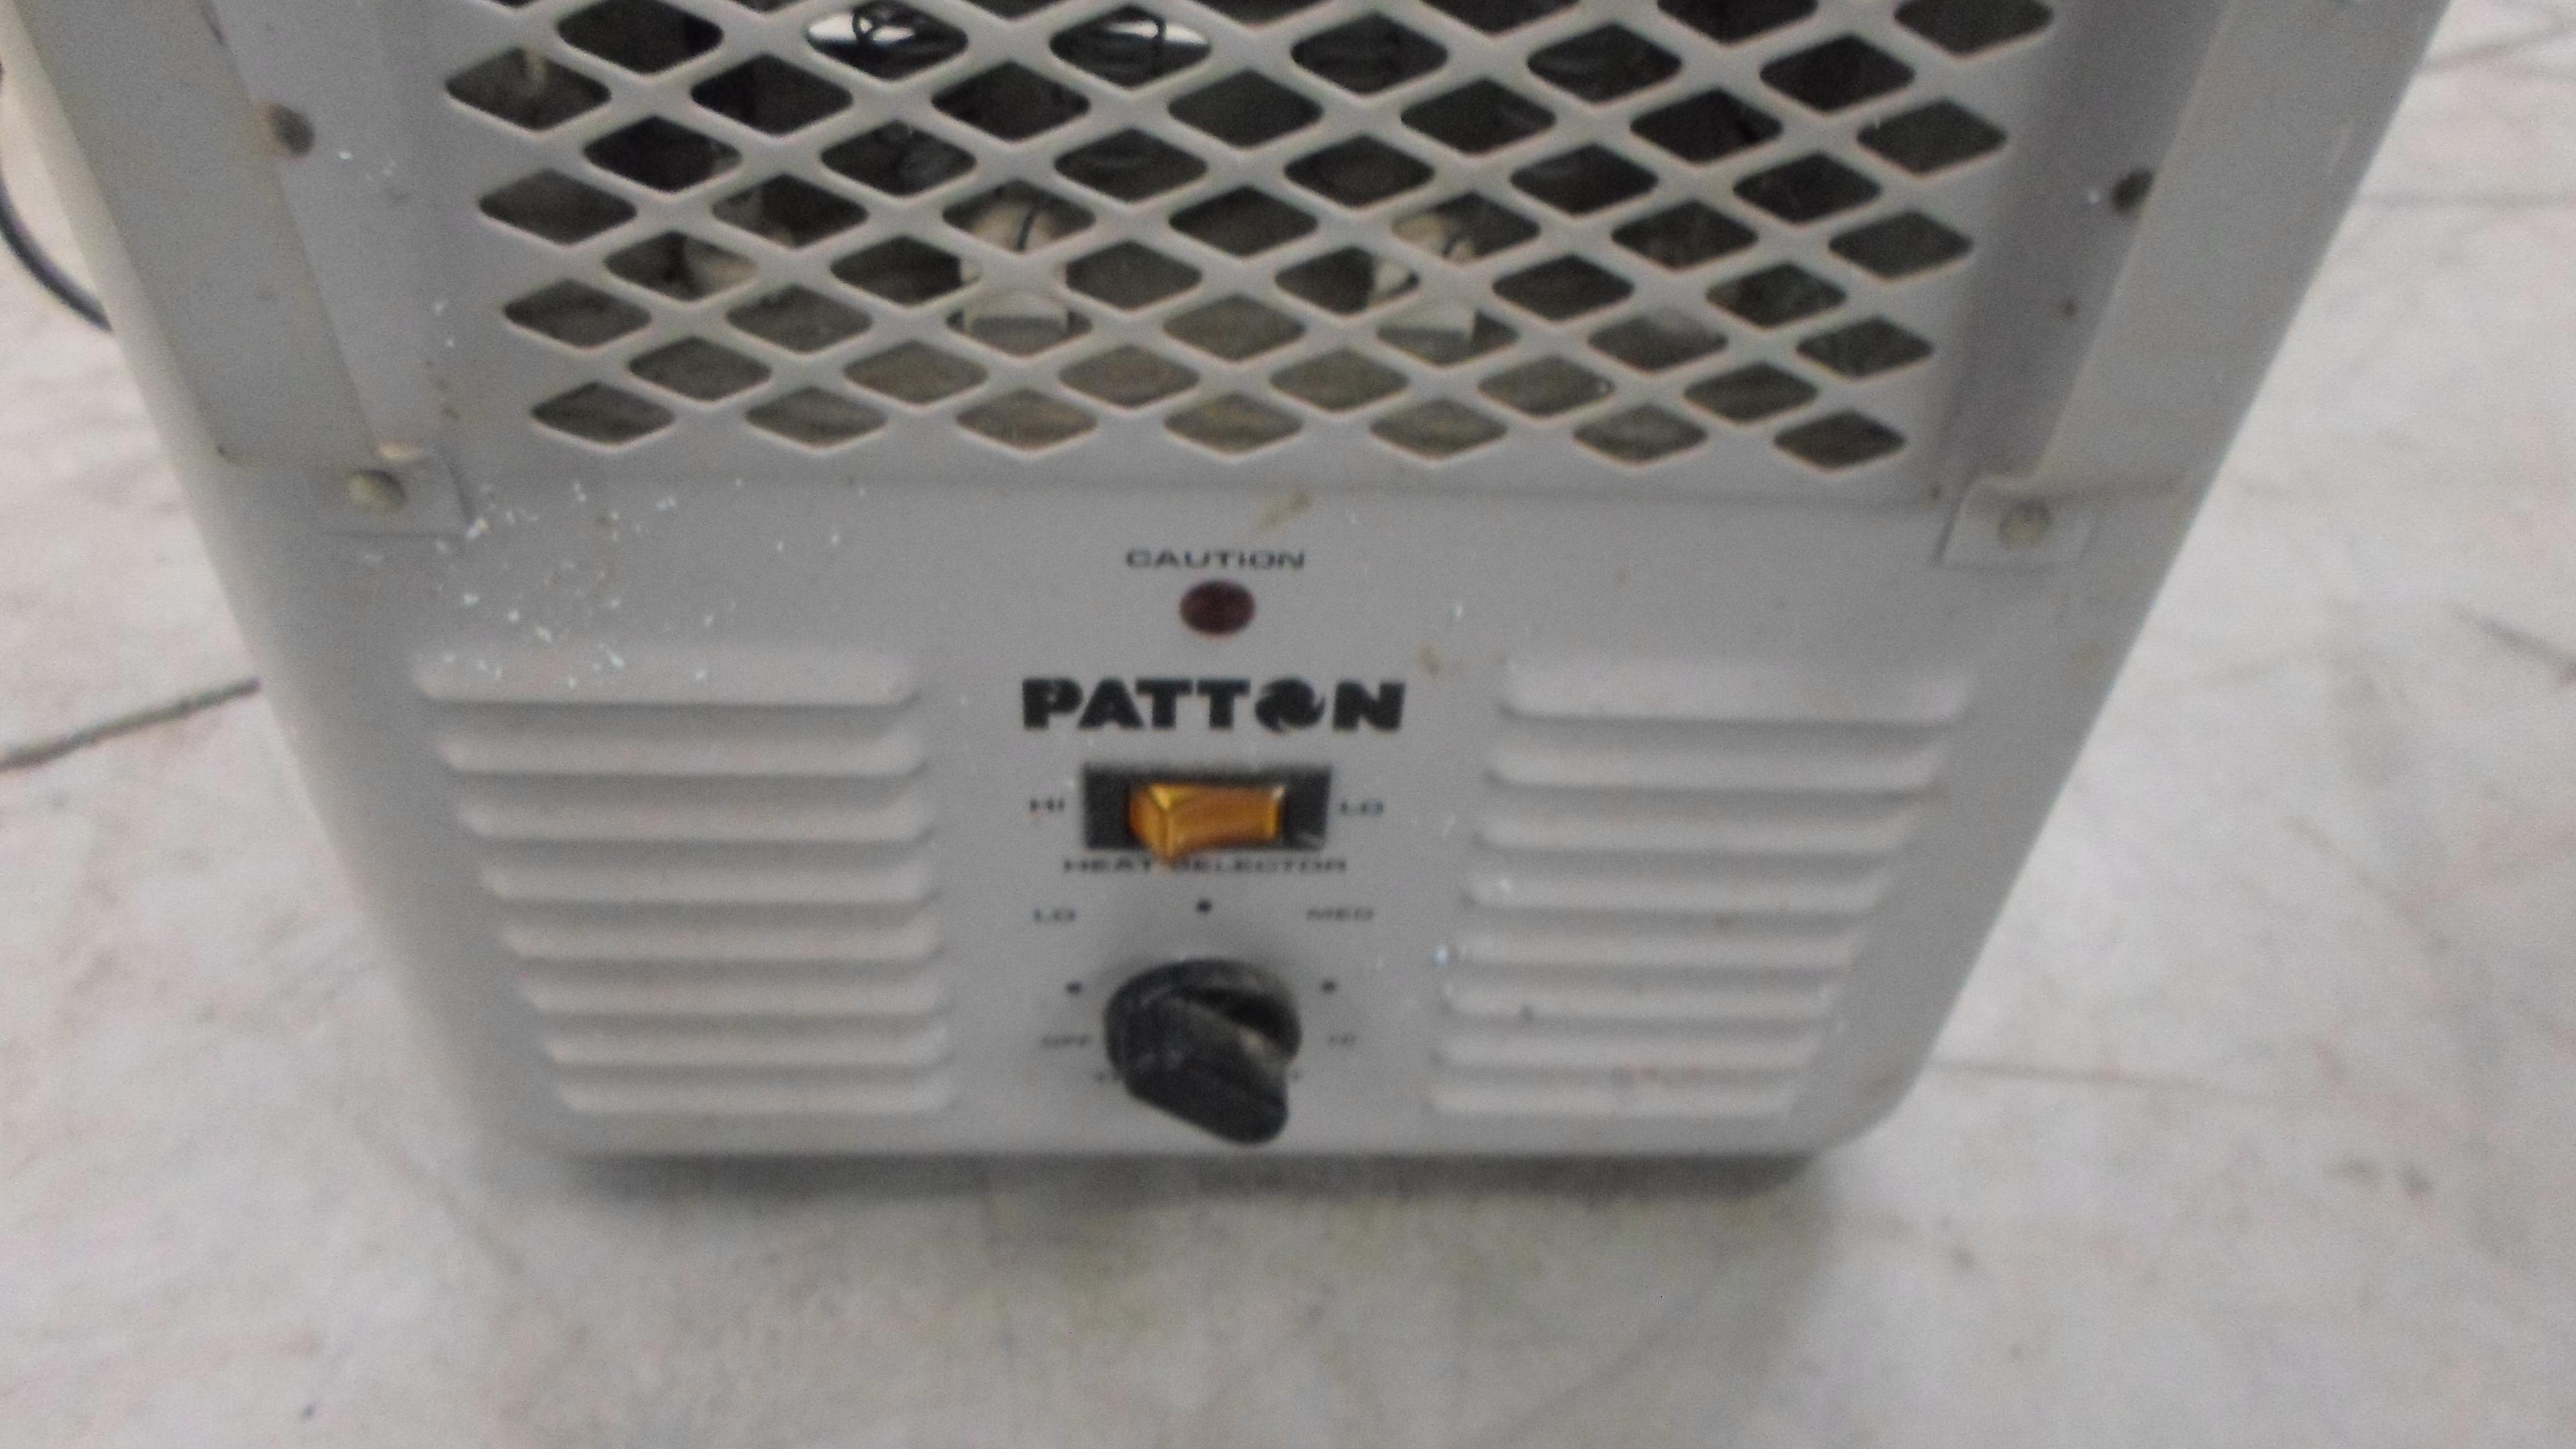 heater, tested patton brand electric heater